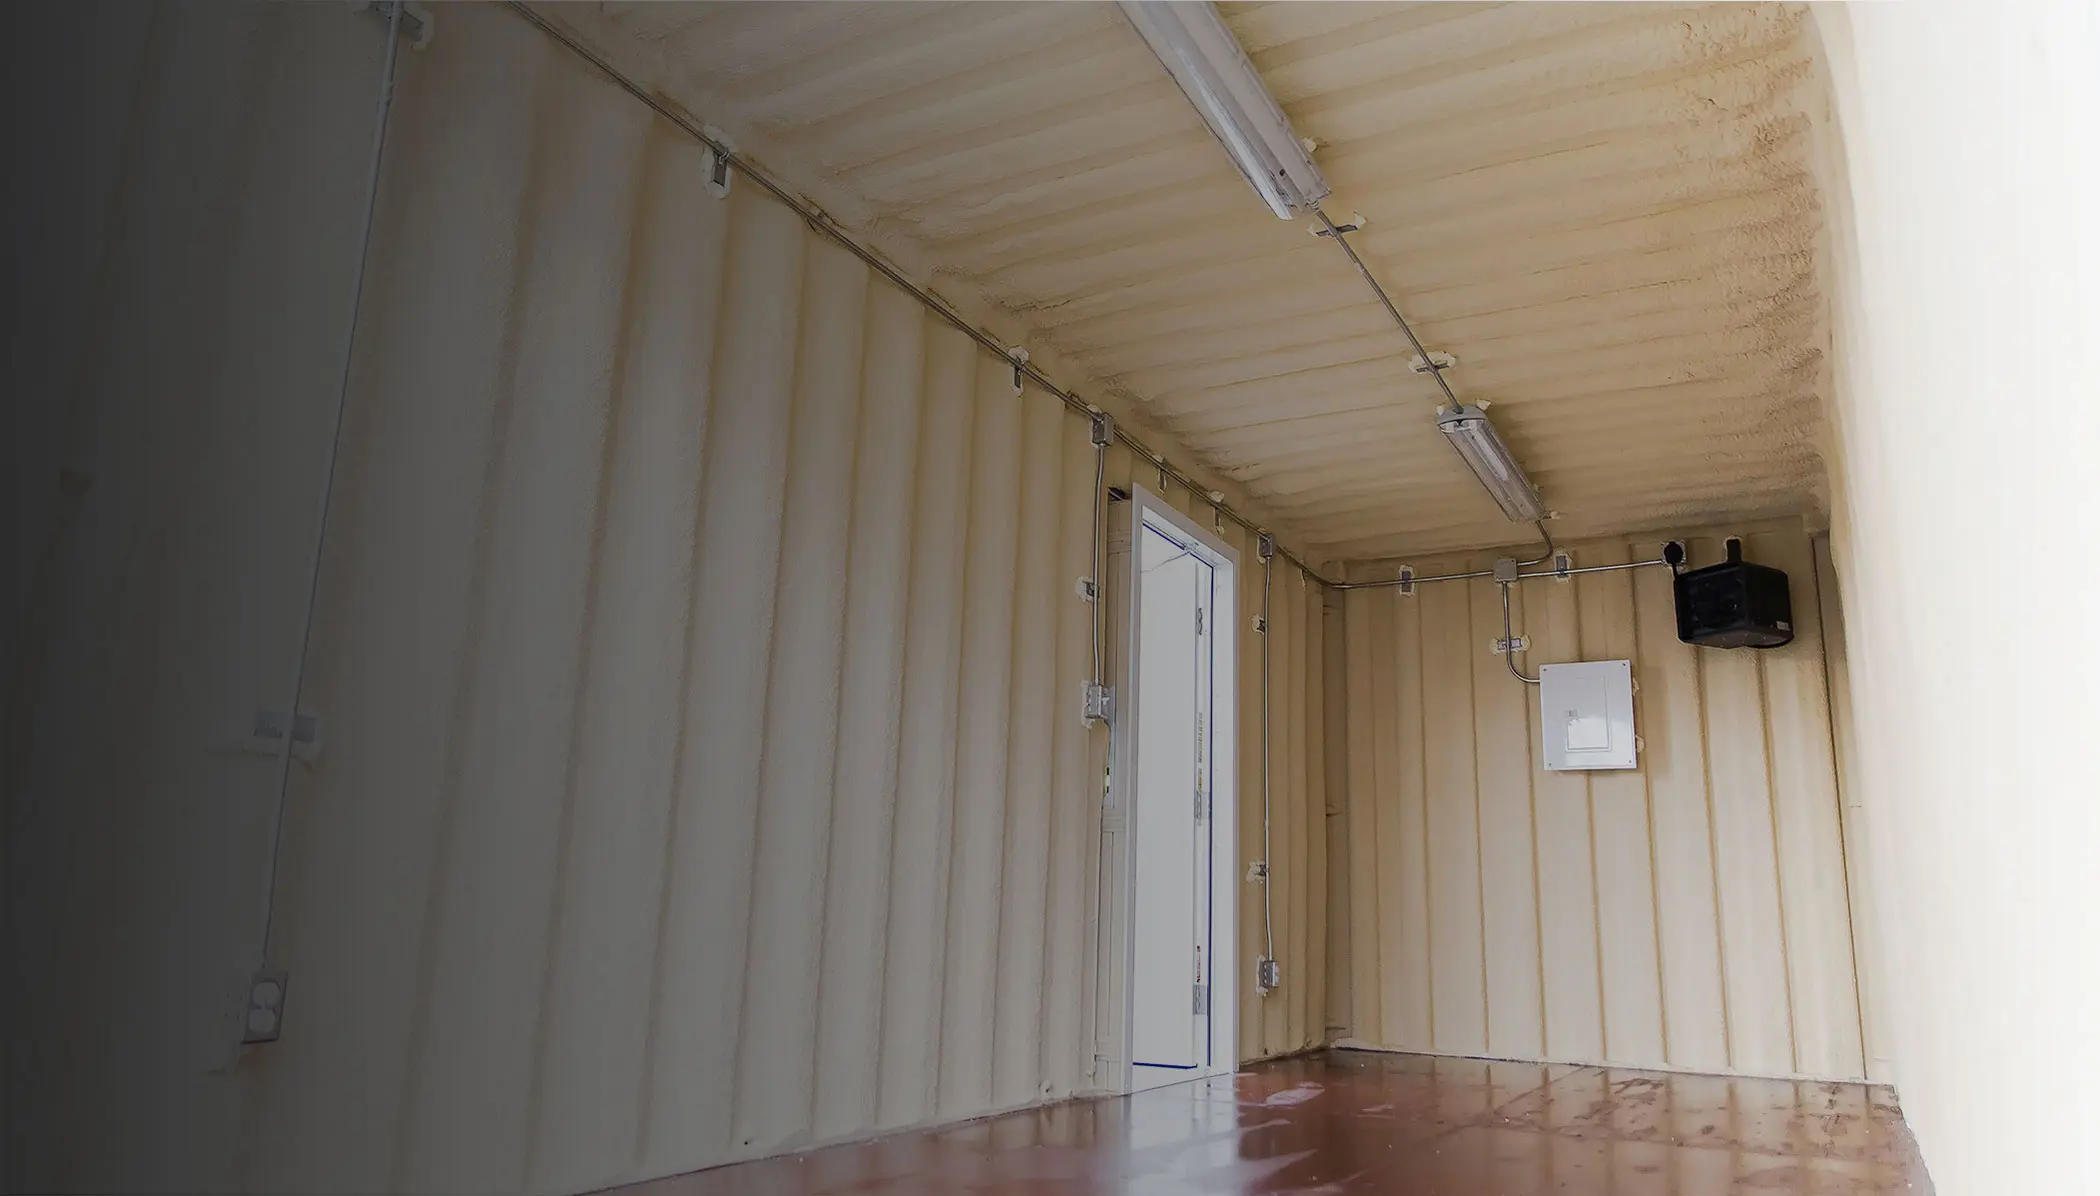 Electrical Options - Storage Units with Heat, Lights and Cooling - BigSteelBox